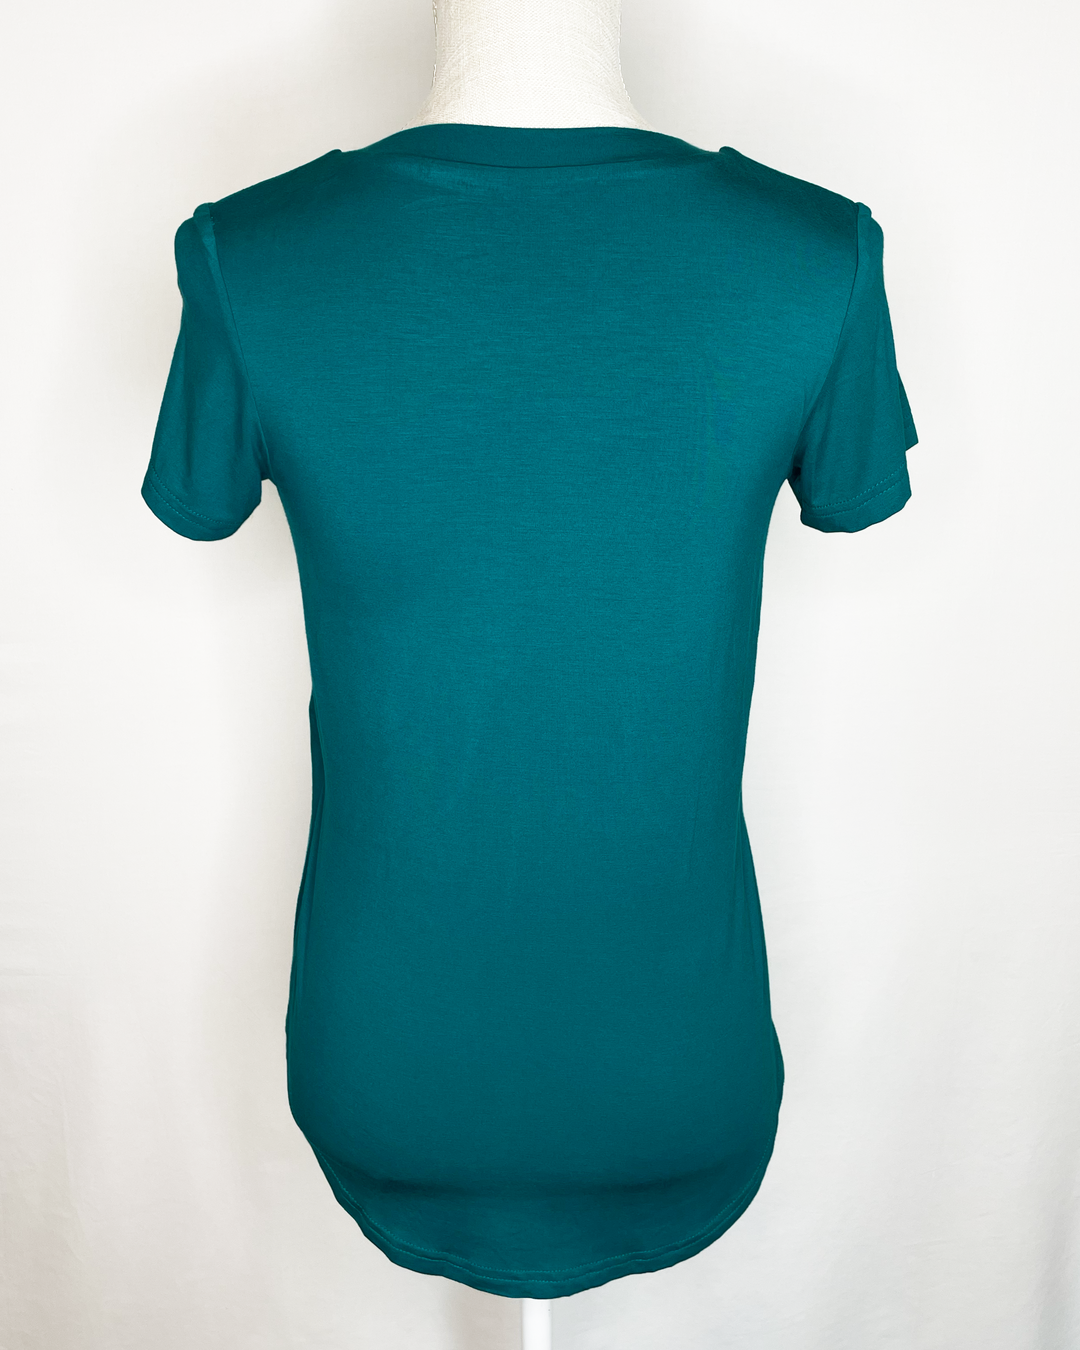 ALICIA Short-Sleeved Braless V-Neck Gather Front Bamboo Top back view - Teal color 